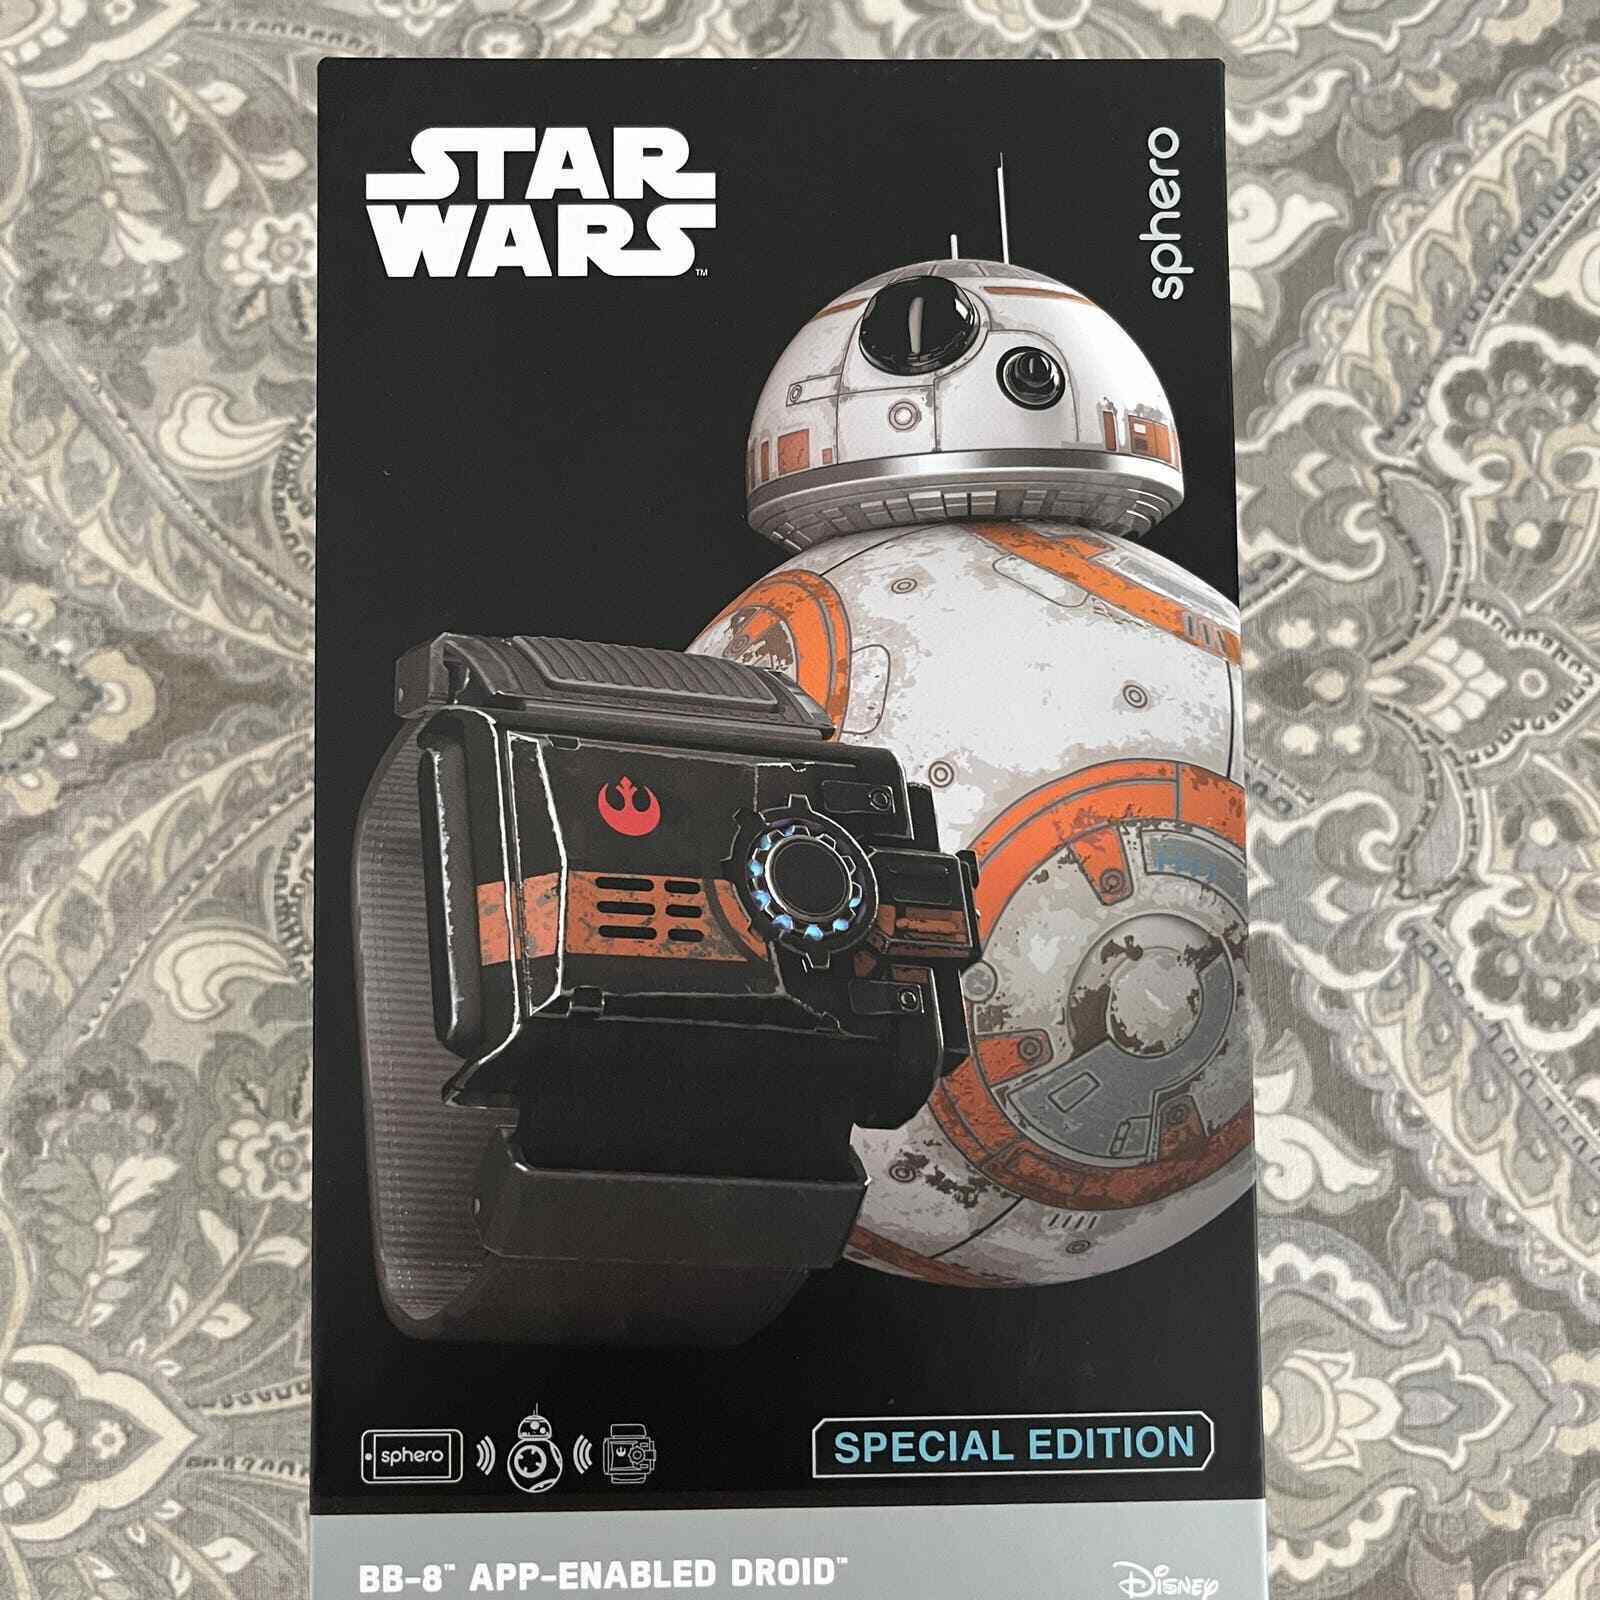 Disney Sphero Star Wars BB-8 App Enabled Droid with Force Band Special Edition